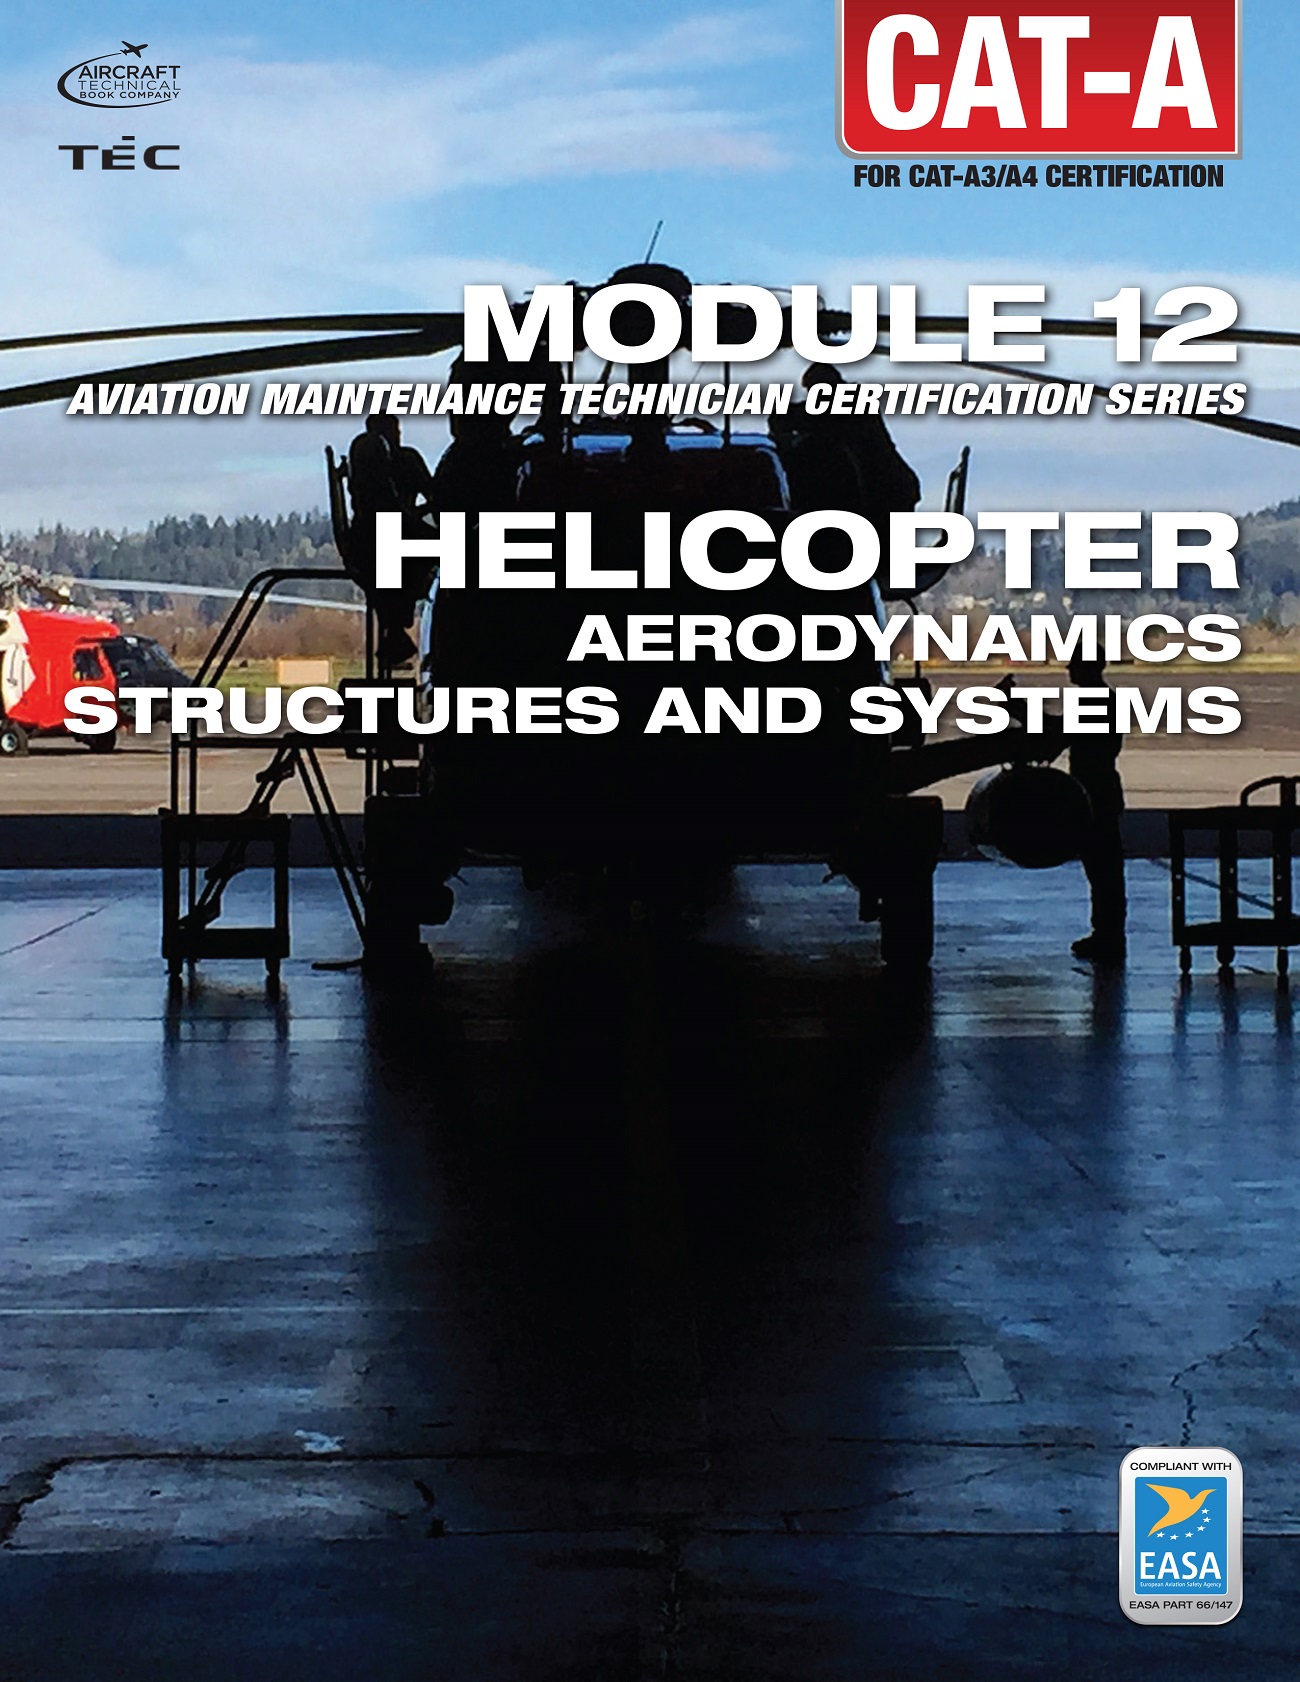 easa part 66 cat-a module 12 helicopter structures and systems